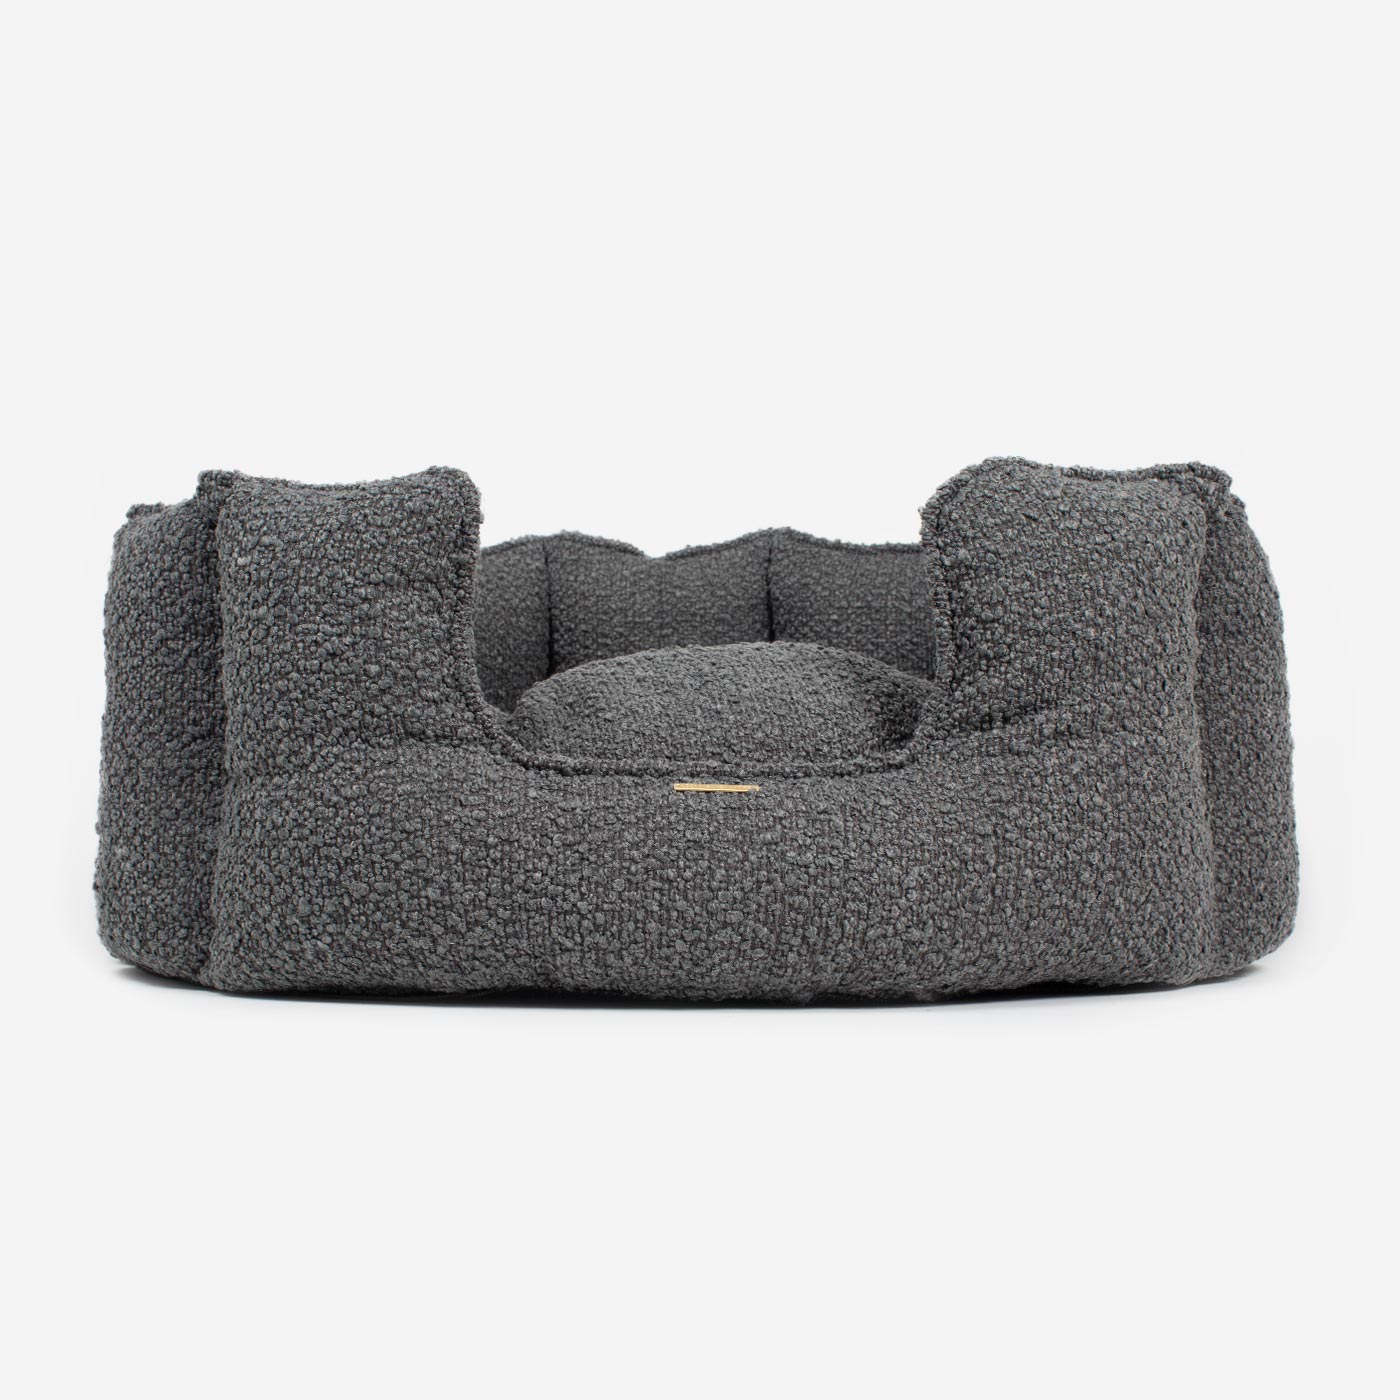 [color:granite boucle]  Discover Our Luxurious High Wall Bed For Cats & Kittens, Featuring inner pillow with plush teddy fleece on one side To Craft The Perfect Cat Bed In Stunning Granite Boucle! Available To Personalize Now at Lords & Labradors US